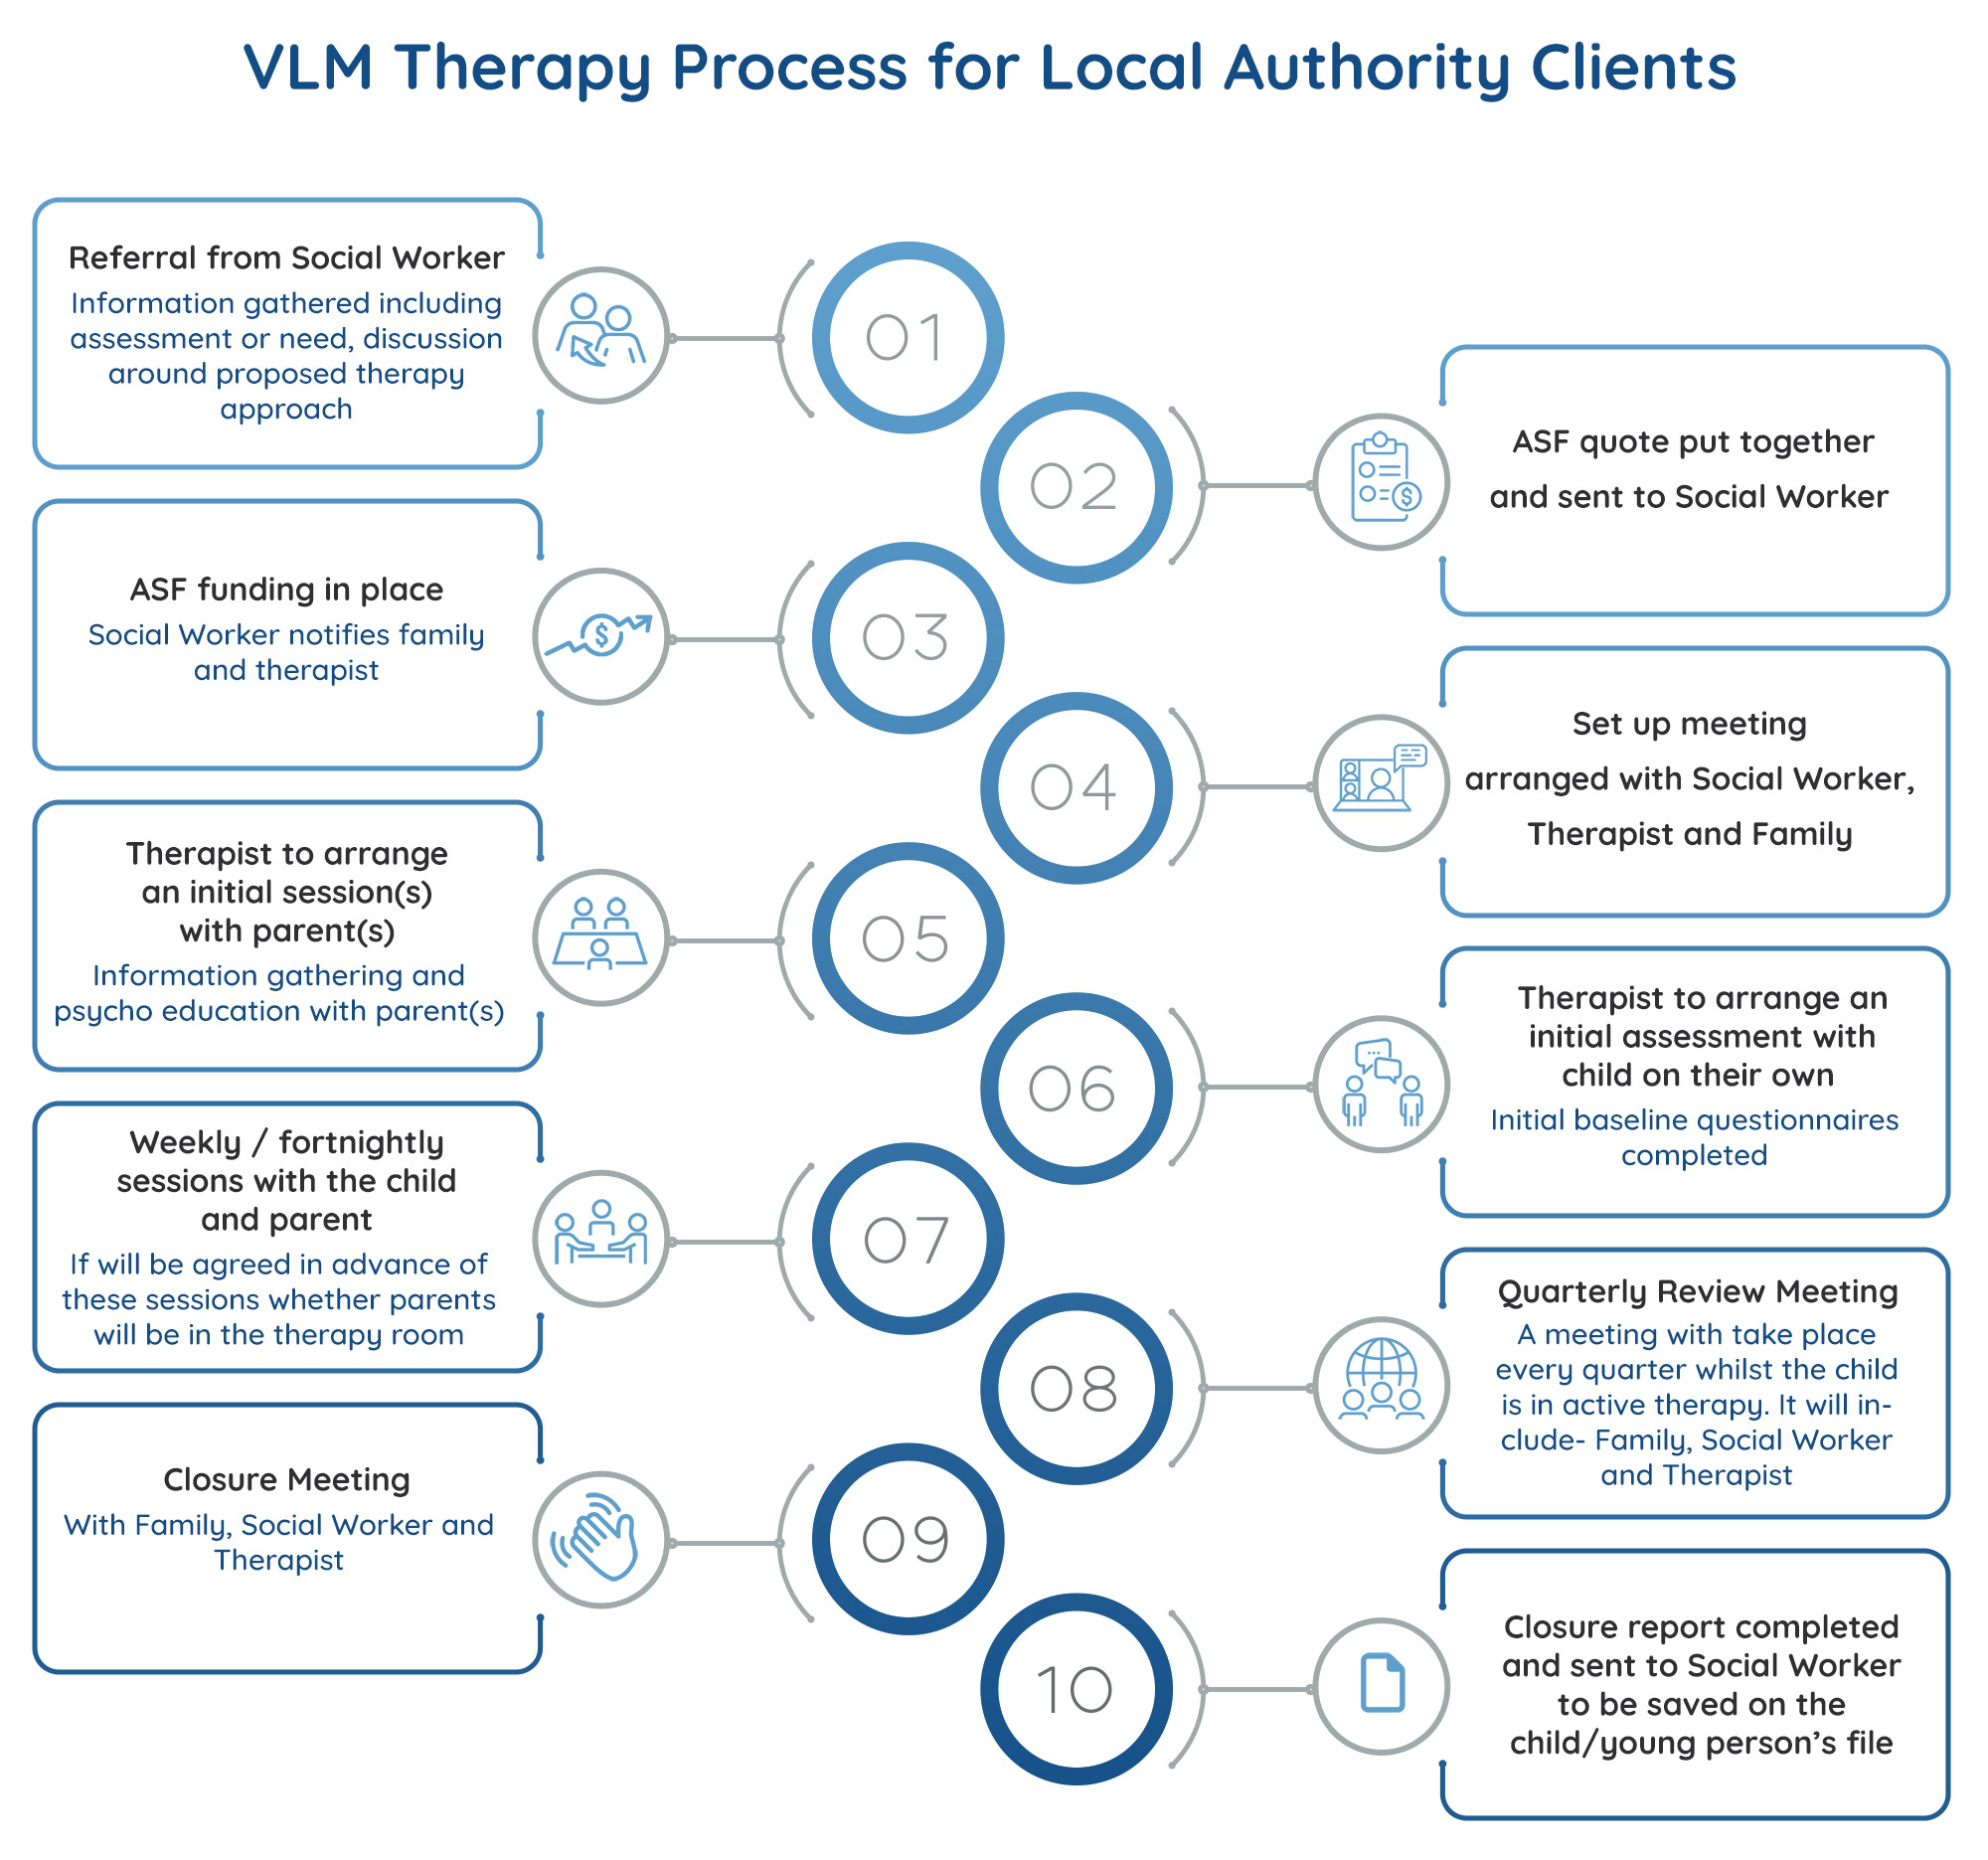 Process for Local Authority Clients